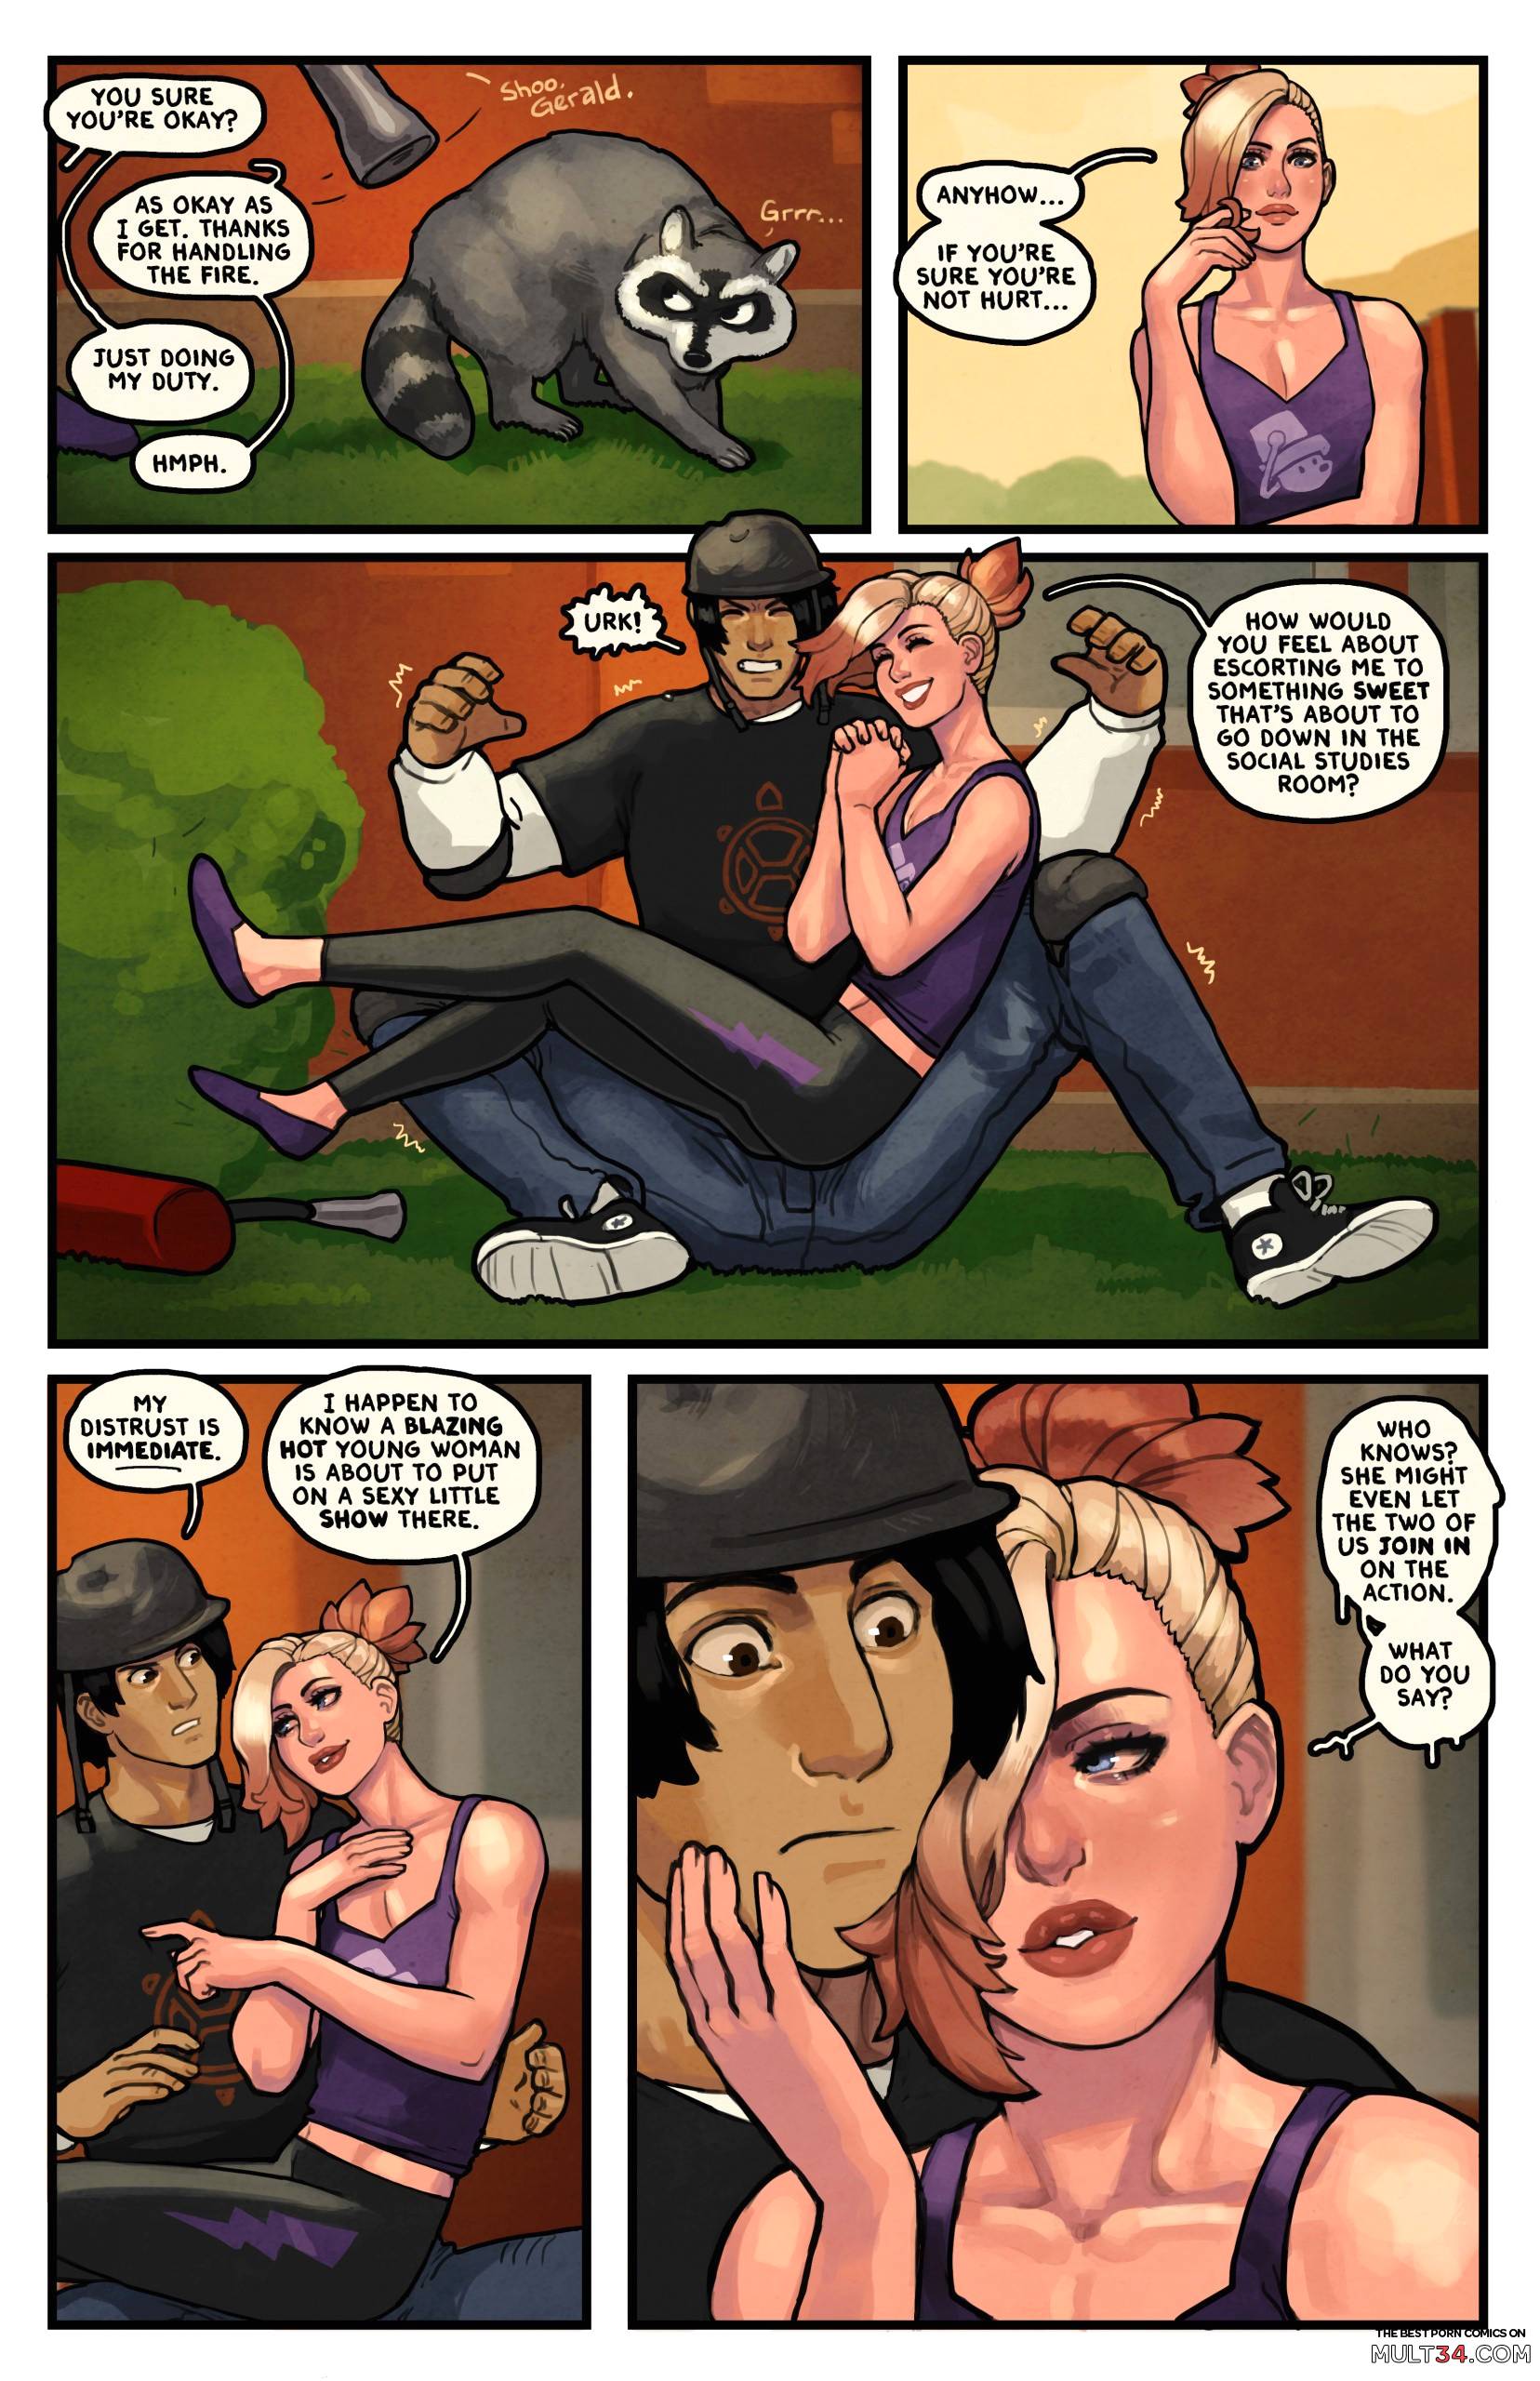 This Romantic World part 2 page 3